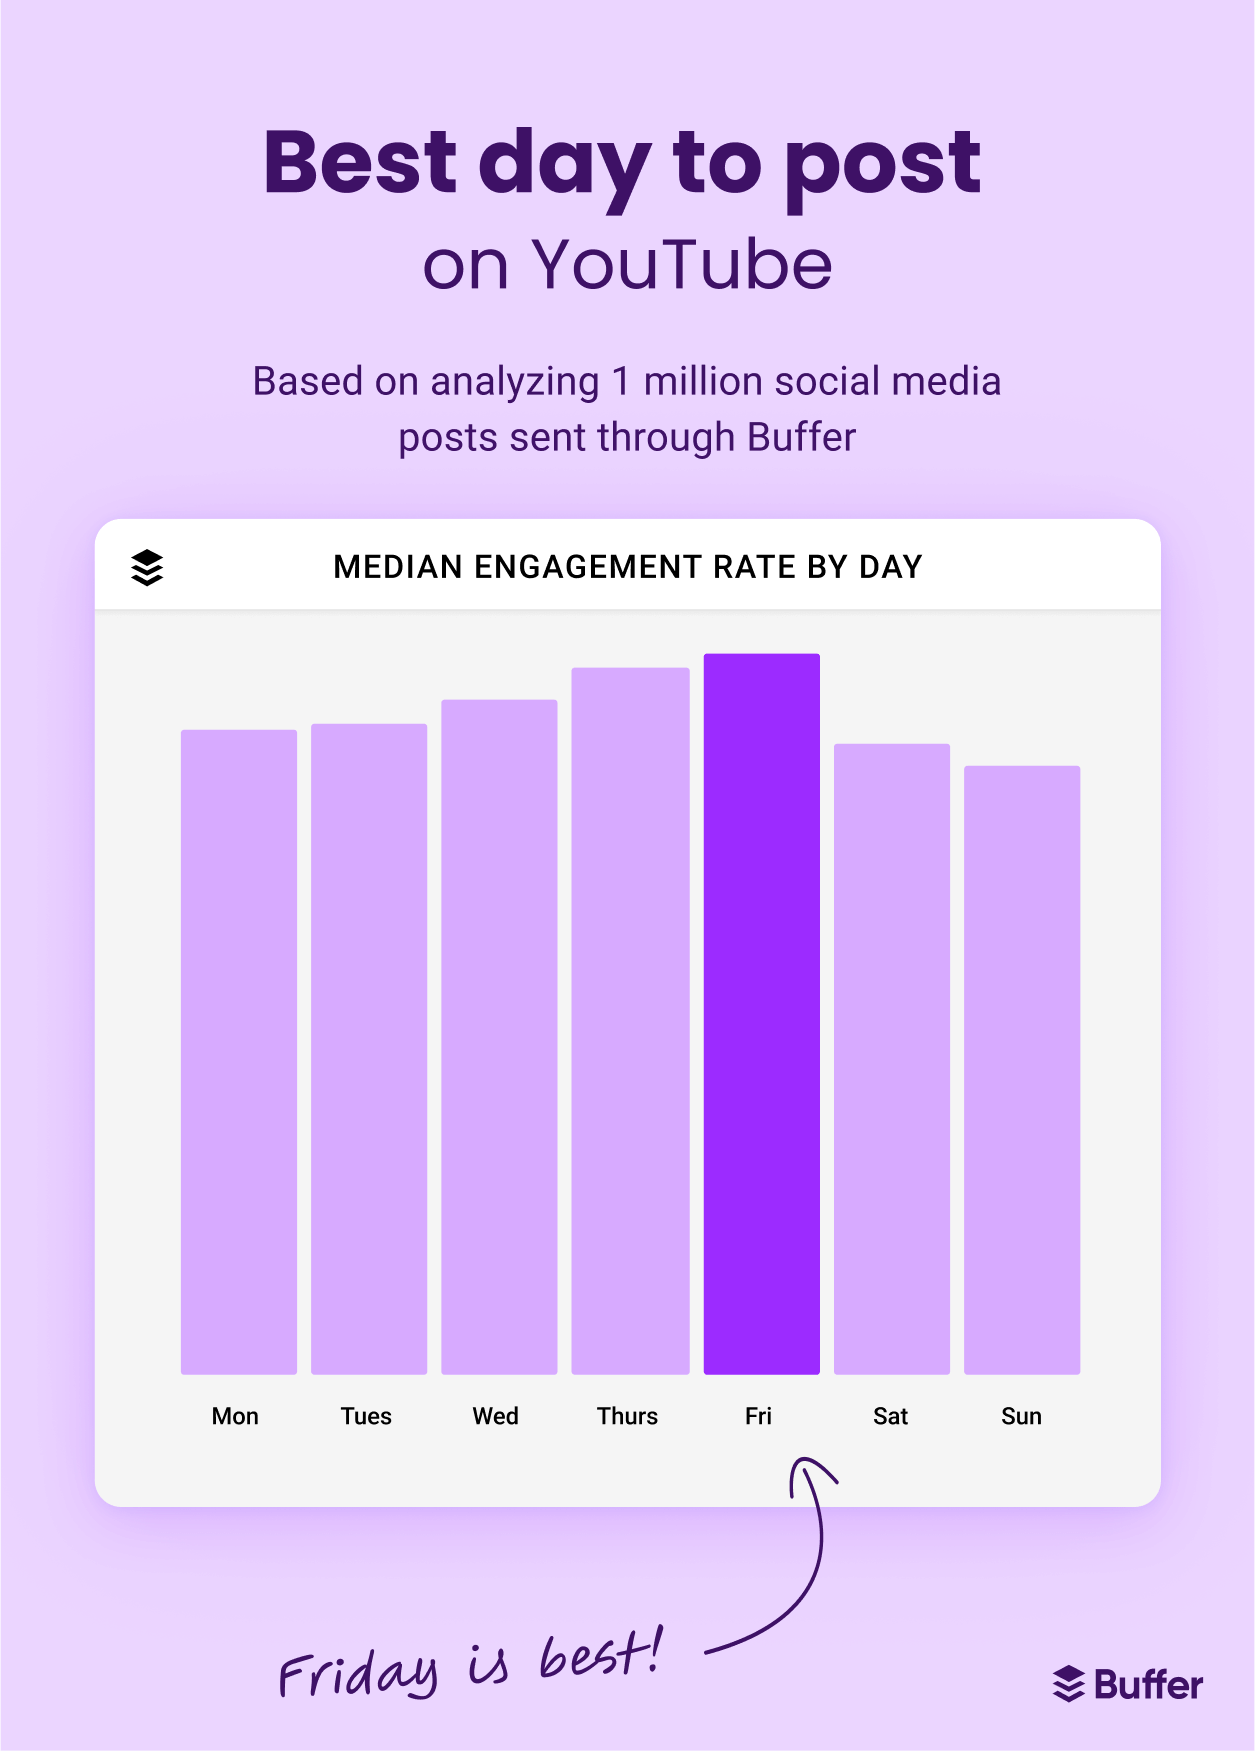 A graph showing the best day of the week to post on YouTube.